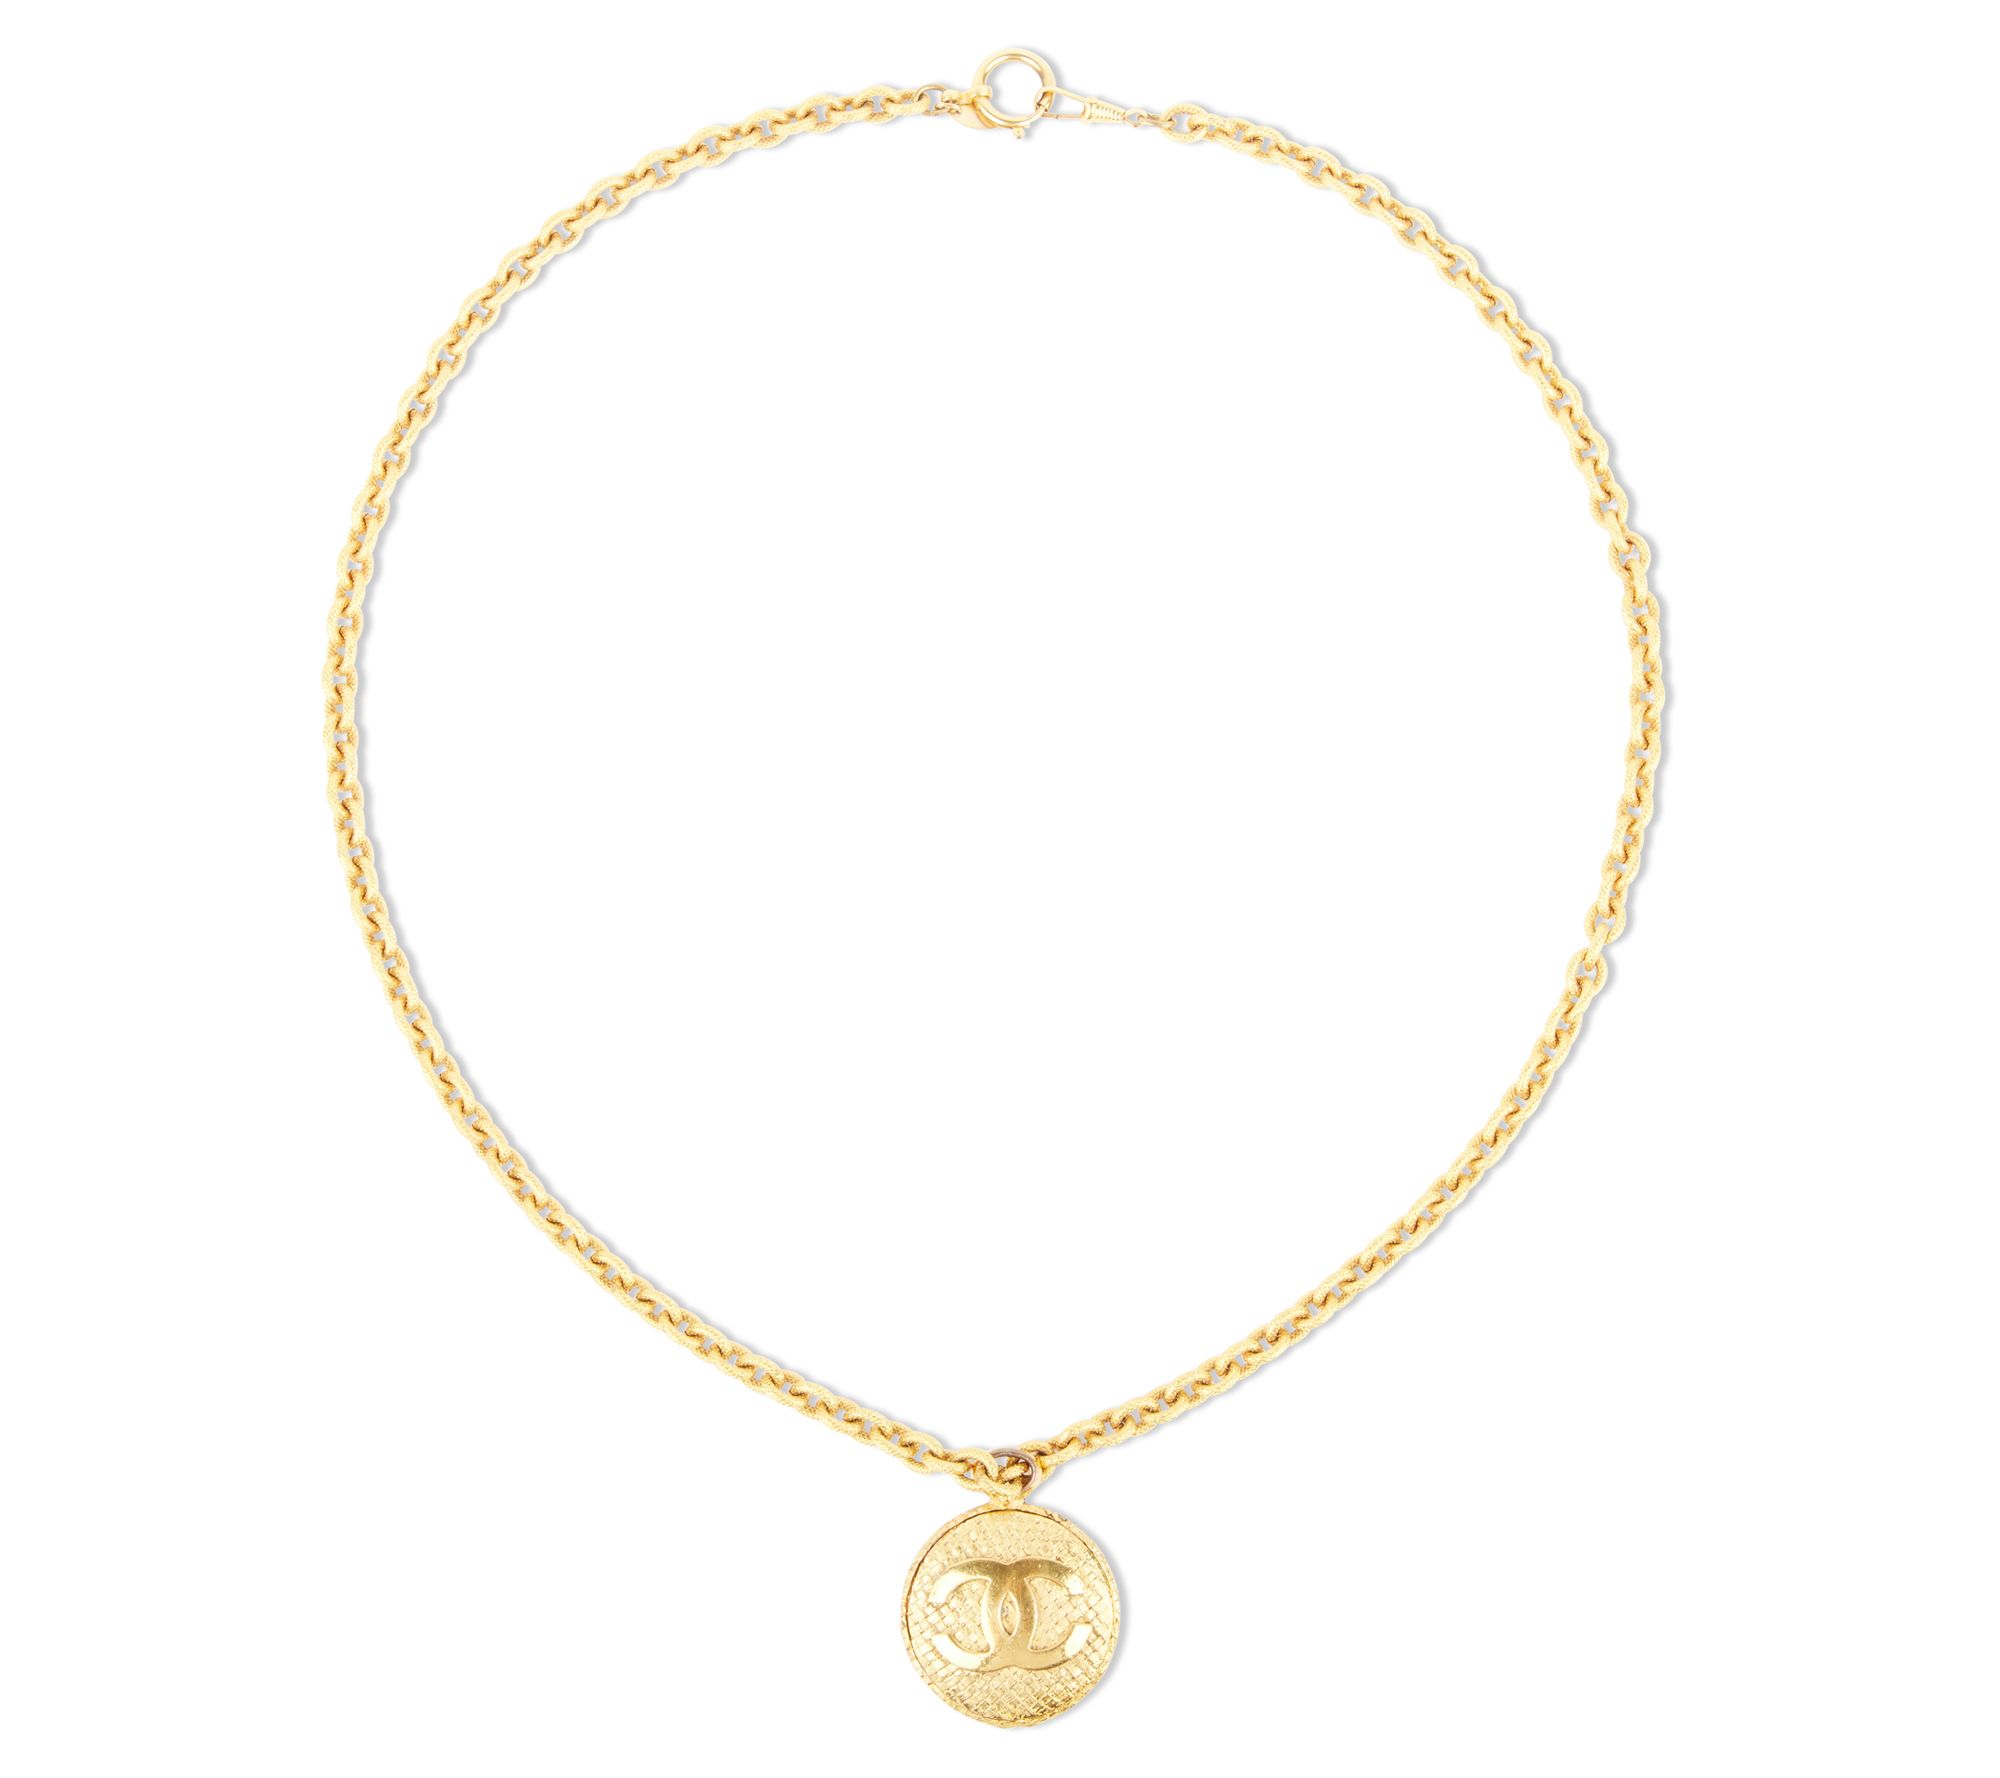 Sold at Auction: Vintage Chanel gold tone mirror pendant charm